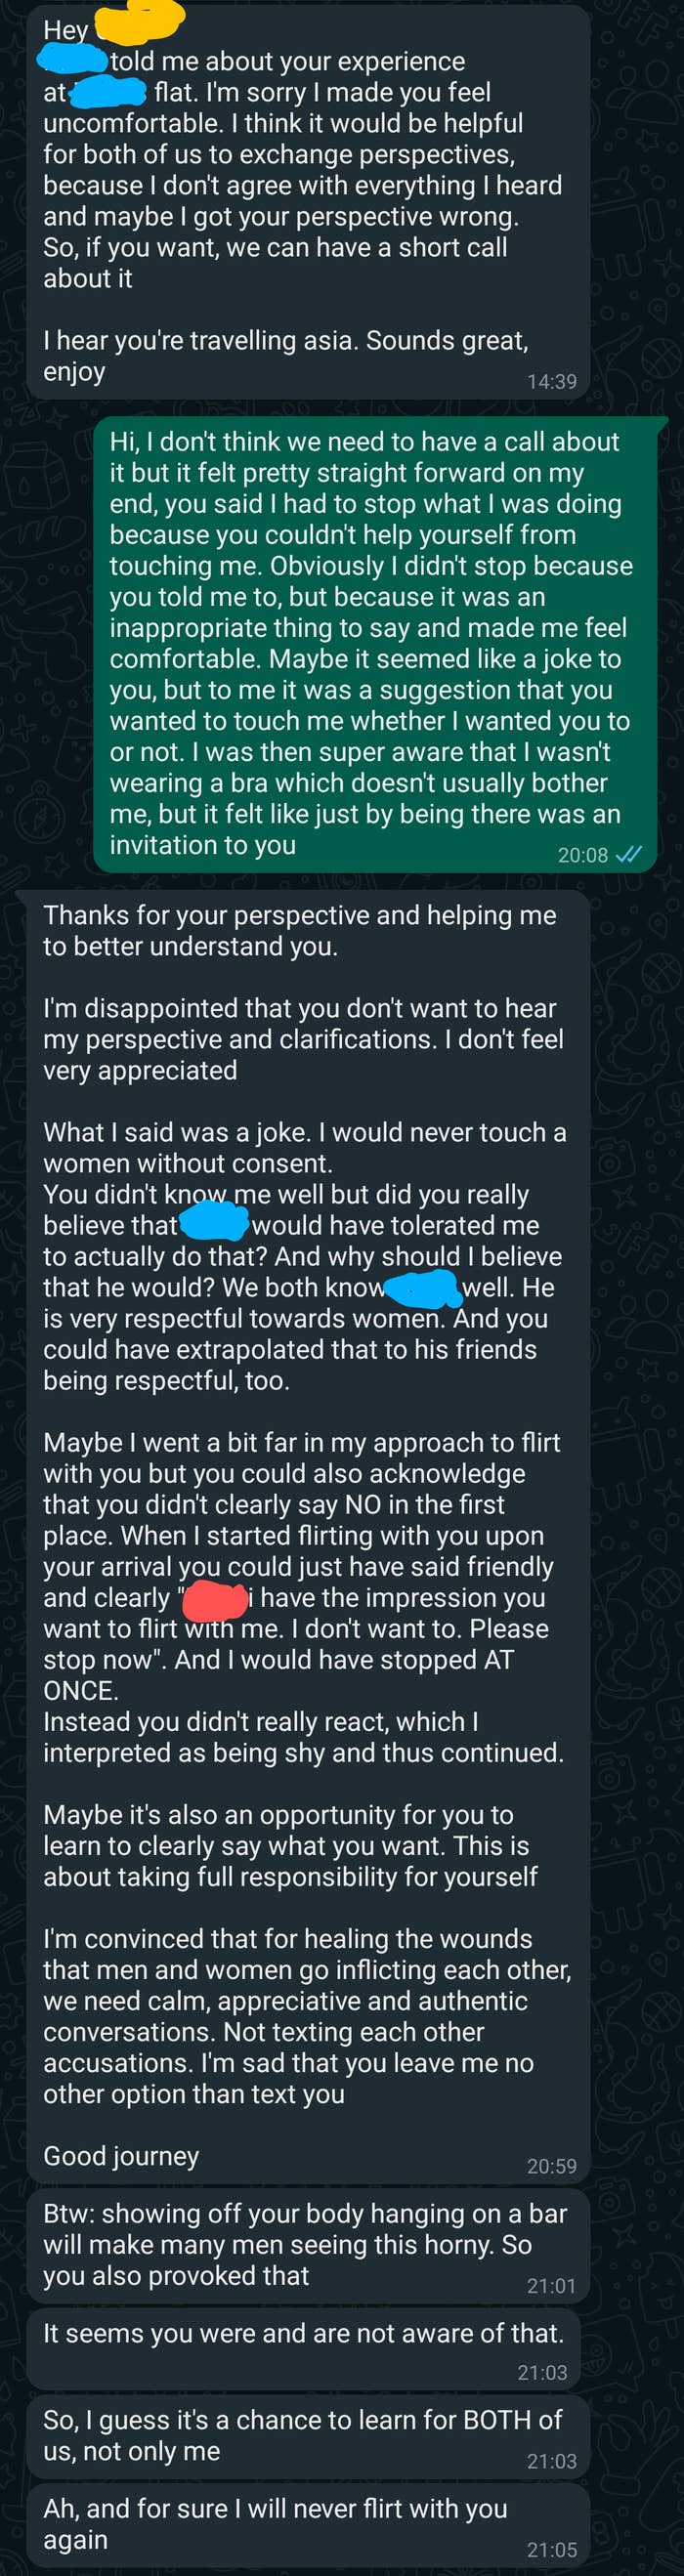 A woman tells a man she was uncomfortable with his comment about touching her, and he responds that it was a joke but that showing off her body while on the pull-up bar will make men horny